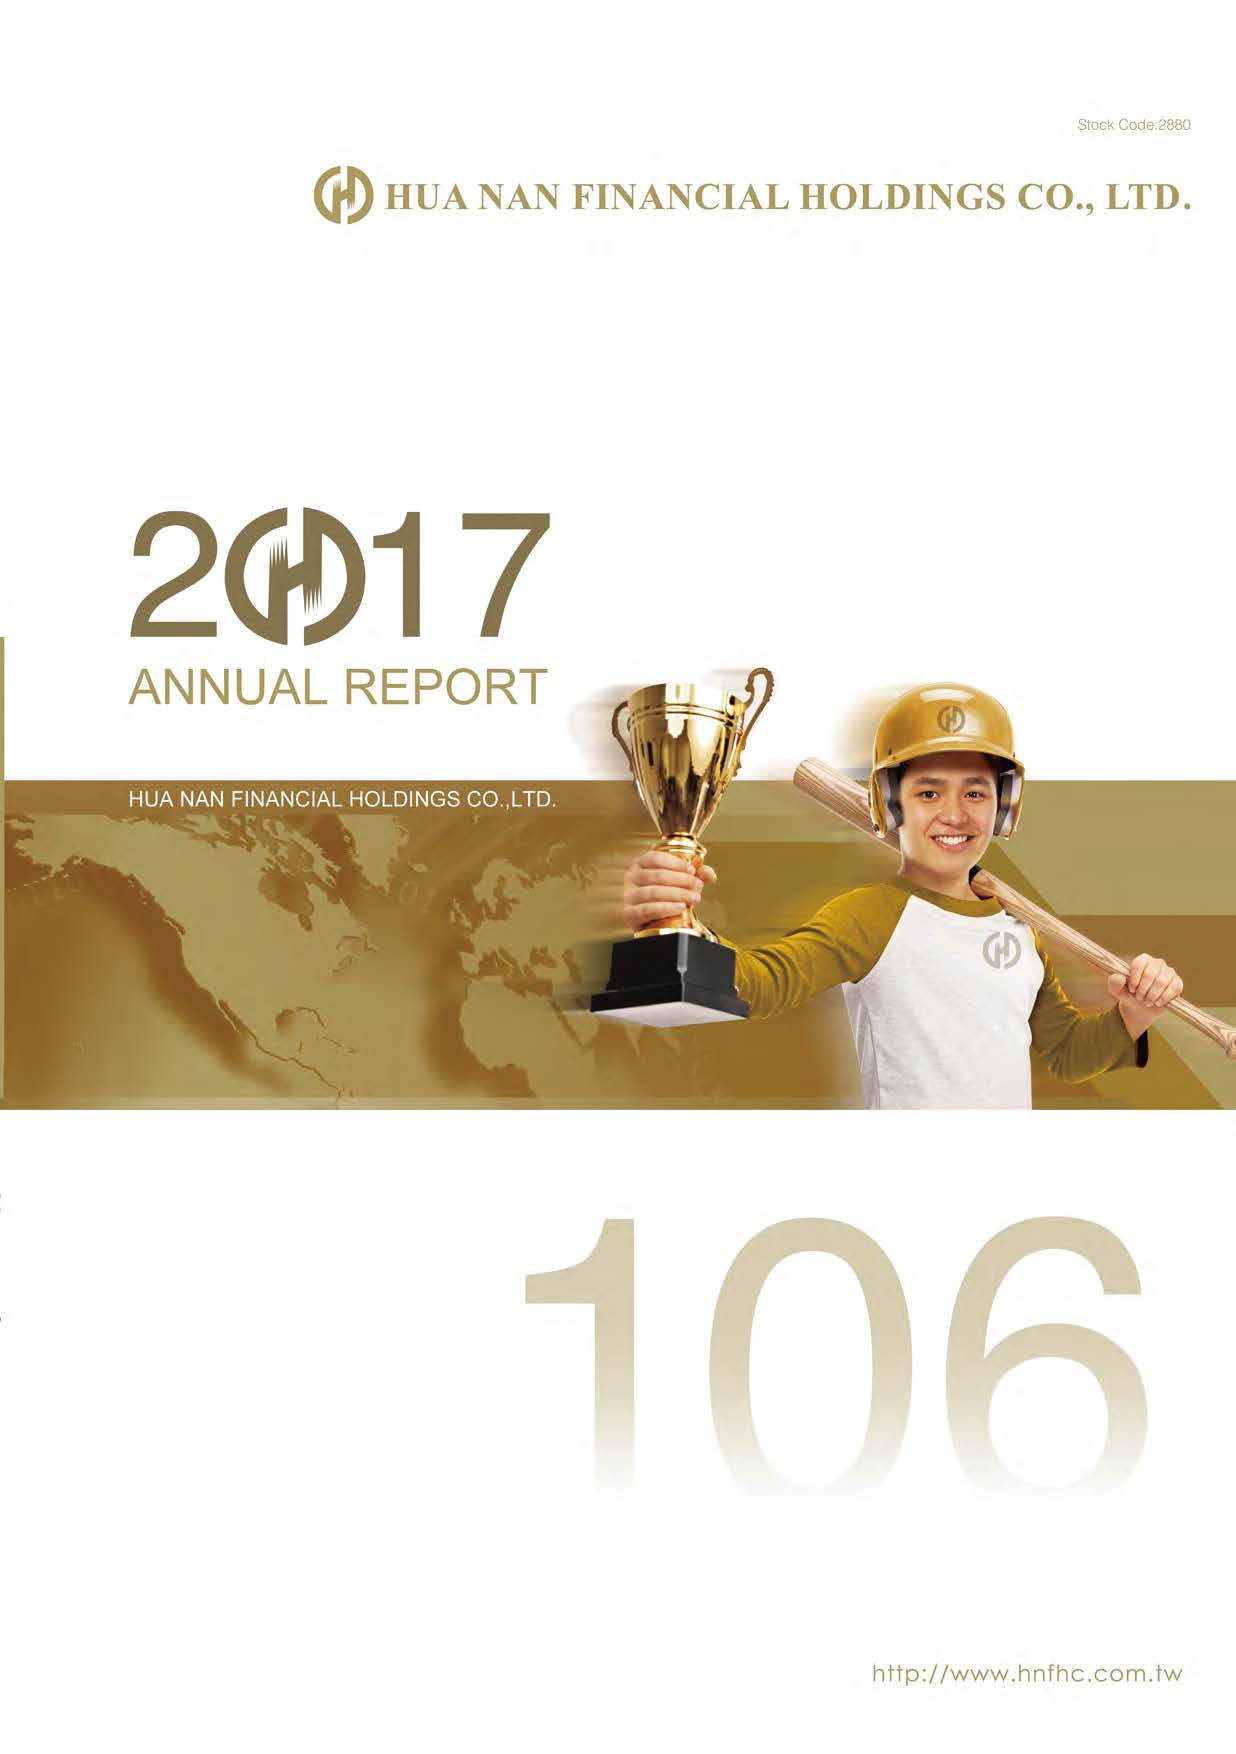 The cover of 2017 Annual Reports